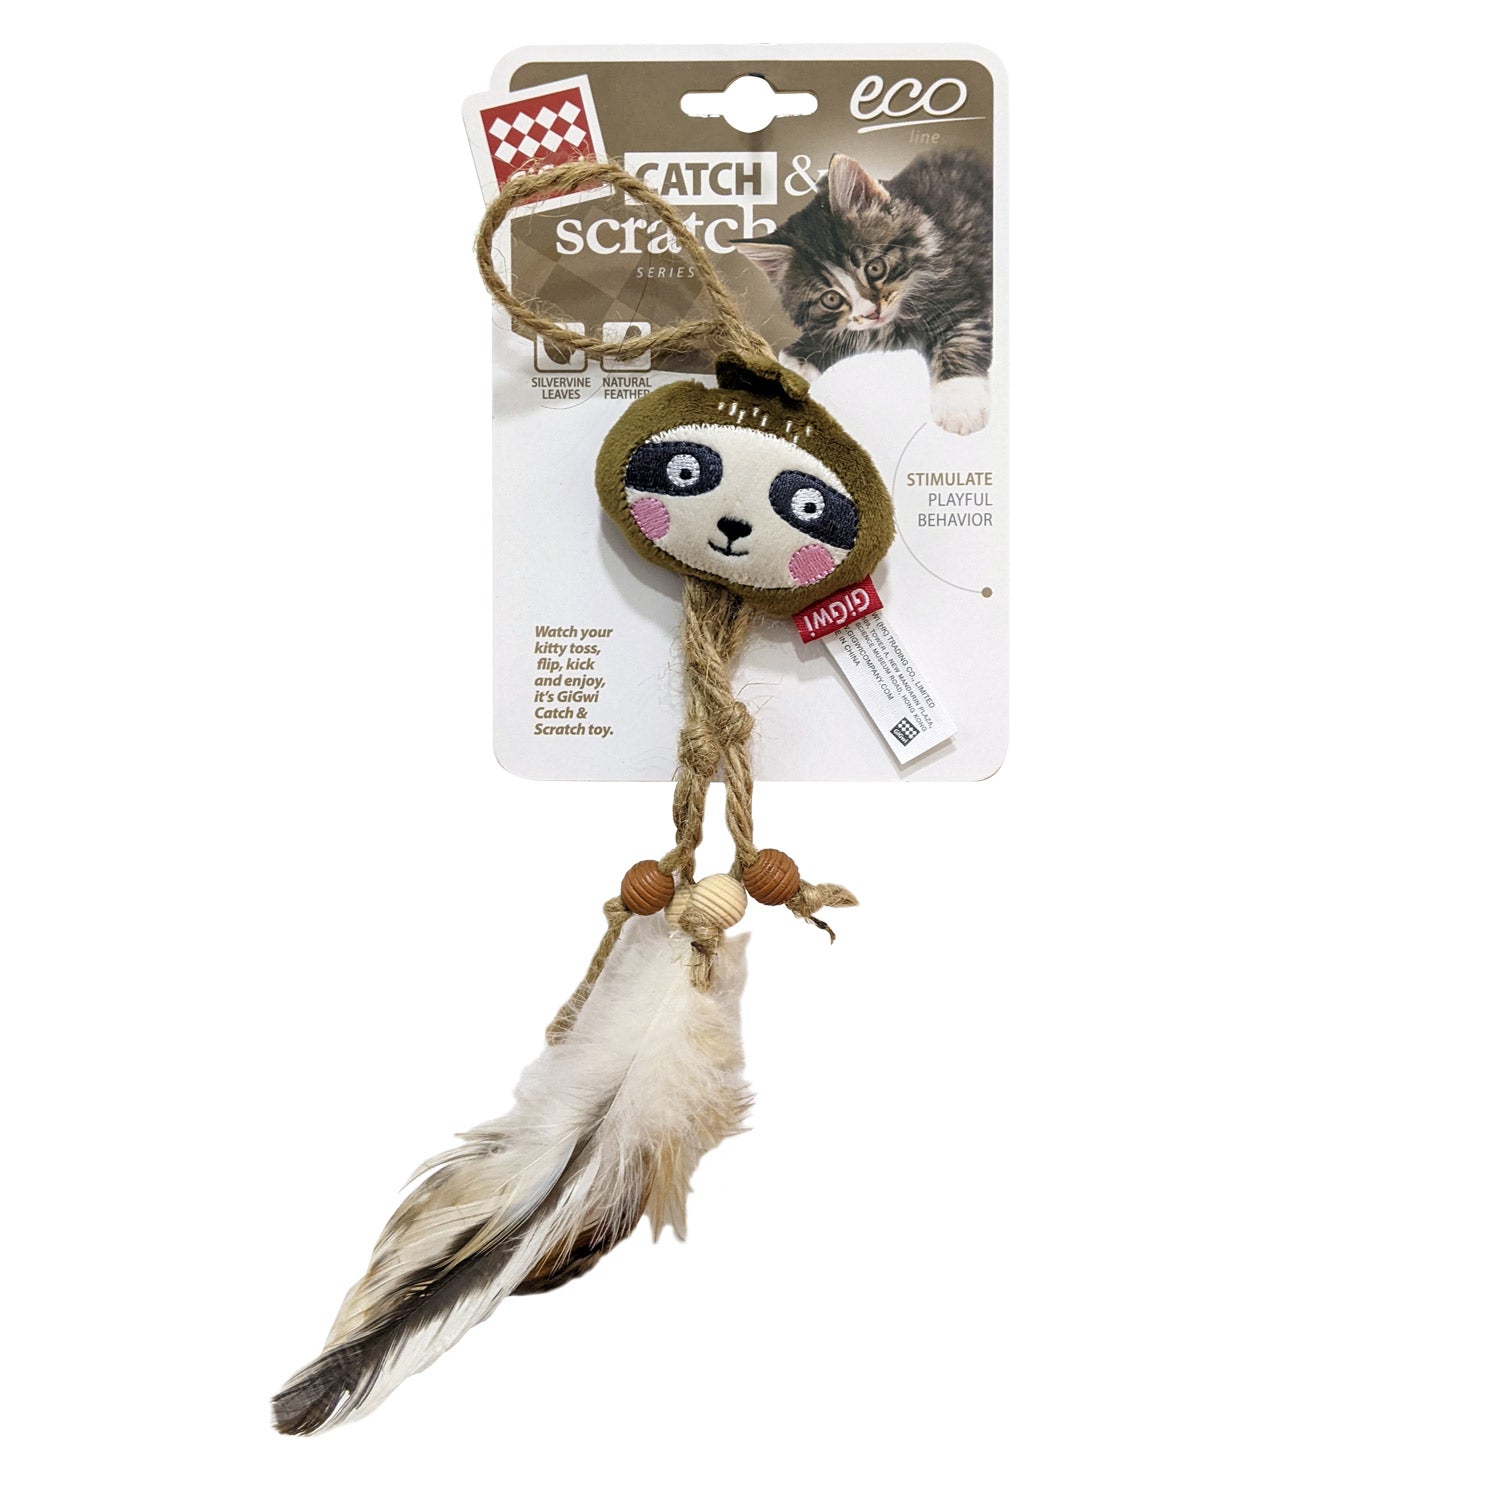 GIGWI Catch & Scratch Eco Line with Feathers (Sloth)